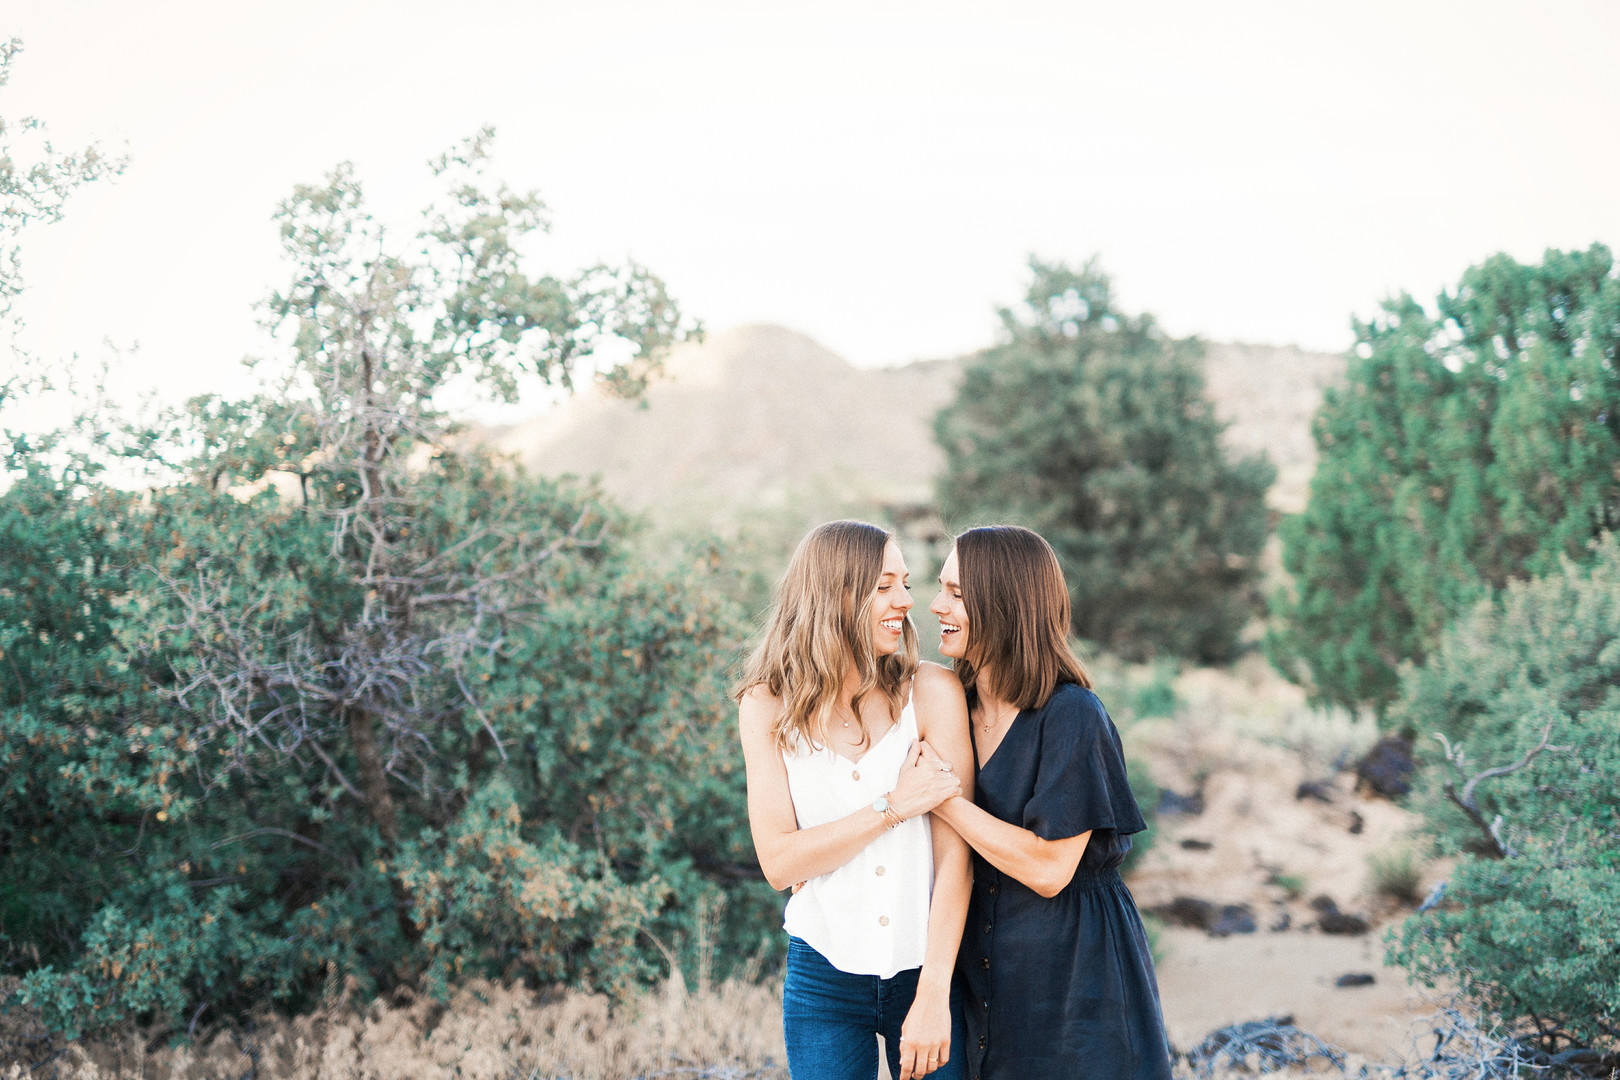 Engagement photos on red rock sandstone cliffs of Snow Canyon LGBTQ+ weddings two brides lesbian engagement Utah